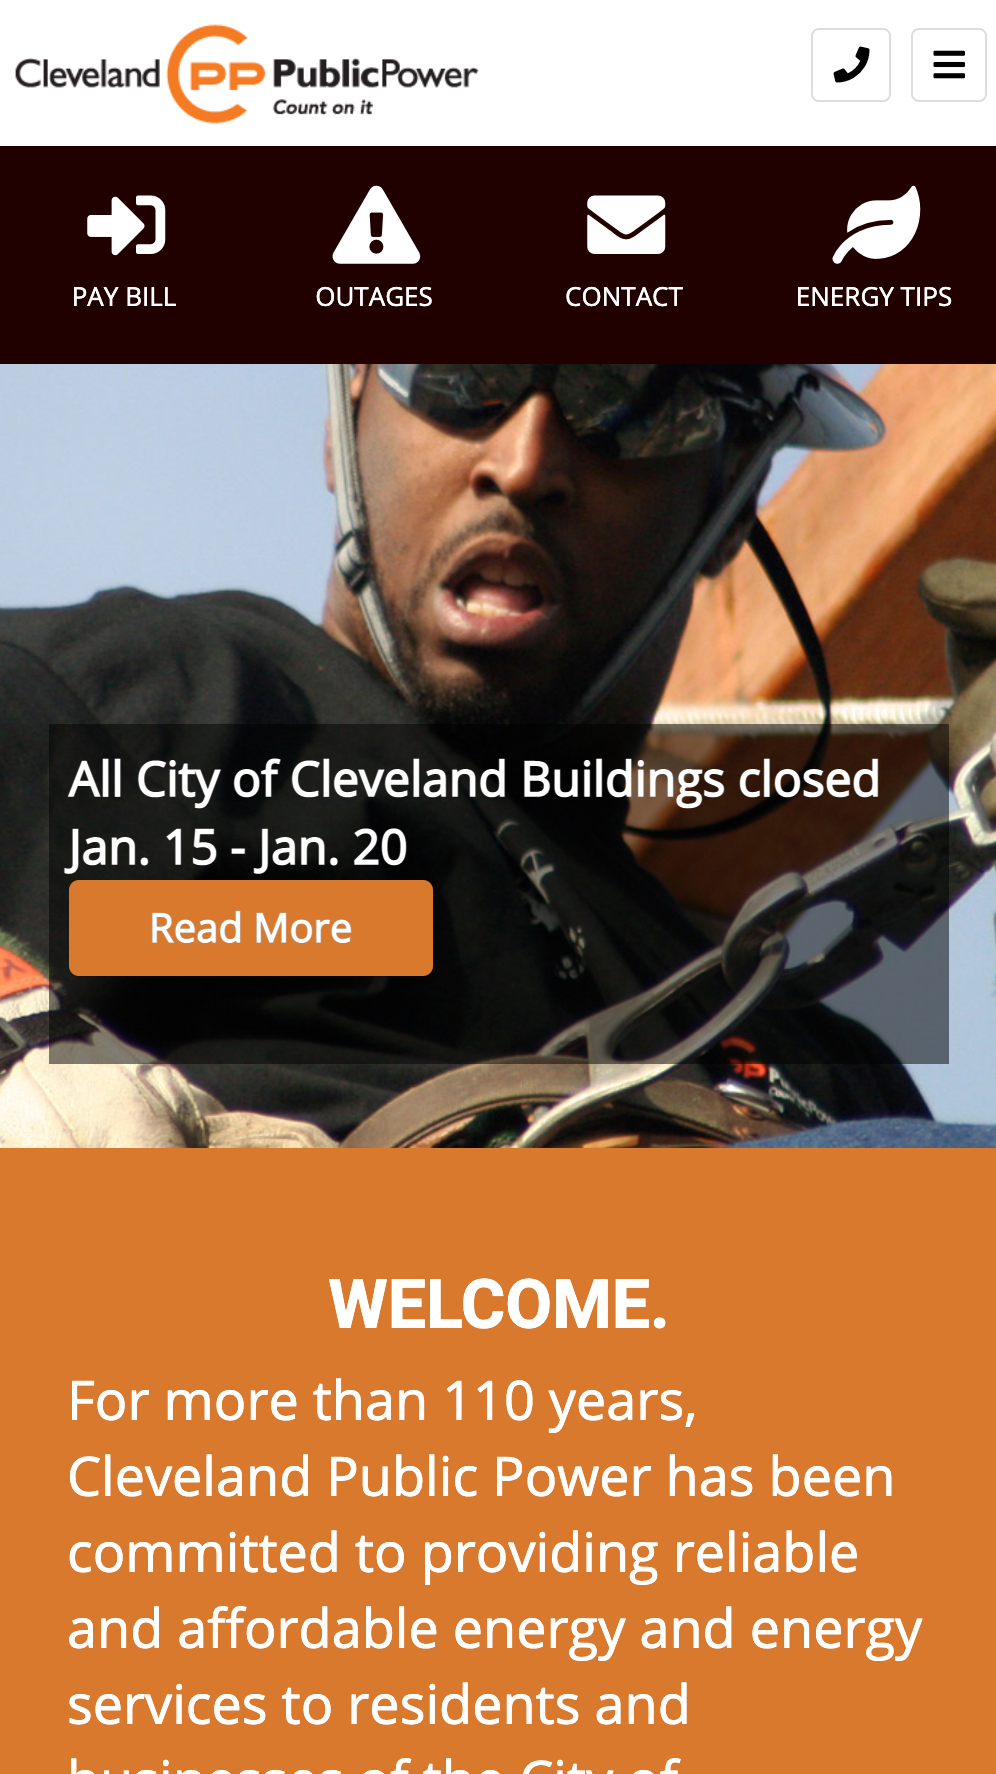 A view of the Cleveland Public Power website on a mobile phone